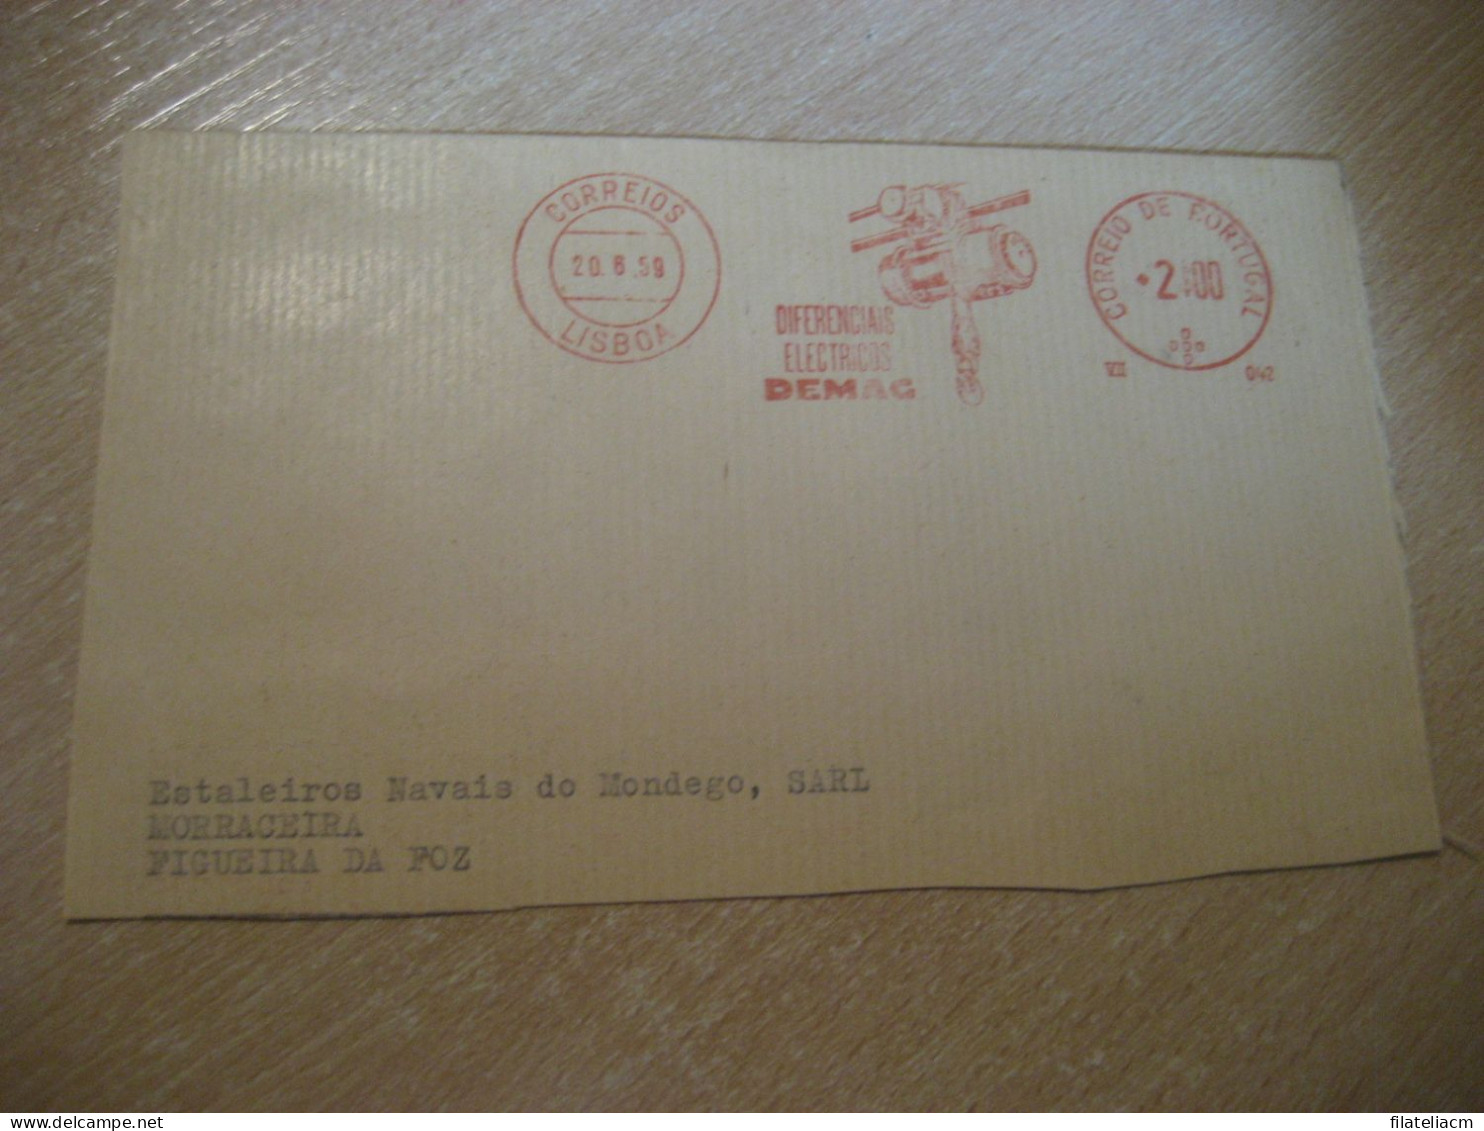 LISBOA 1959 To Figueira Da Foz DEMAC Diferenciais Electricos Physics Meter Mail Cancel Cut Cuted Cover PORTUGAL - Lettres & Documents